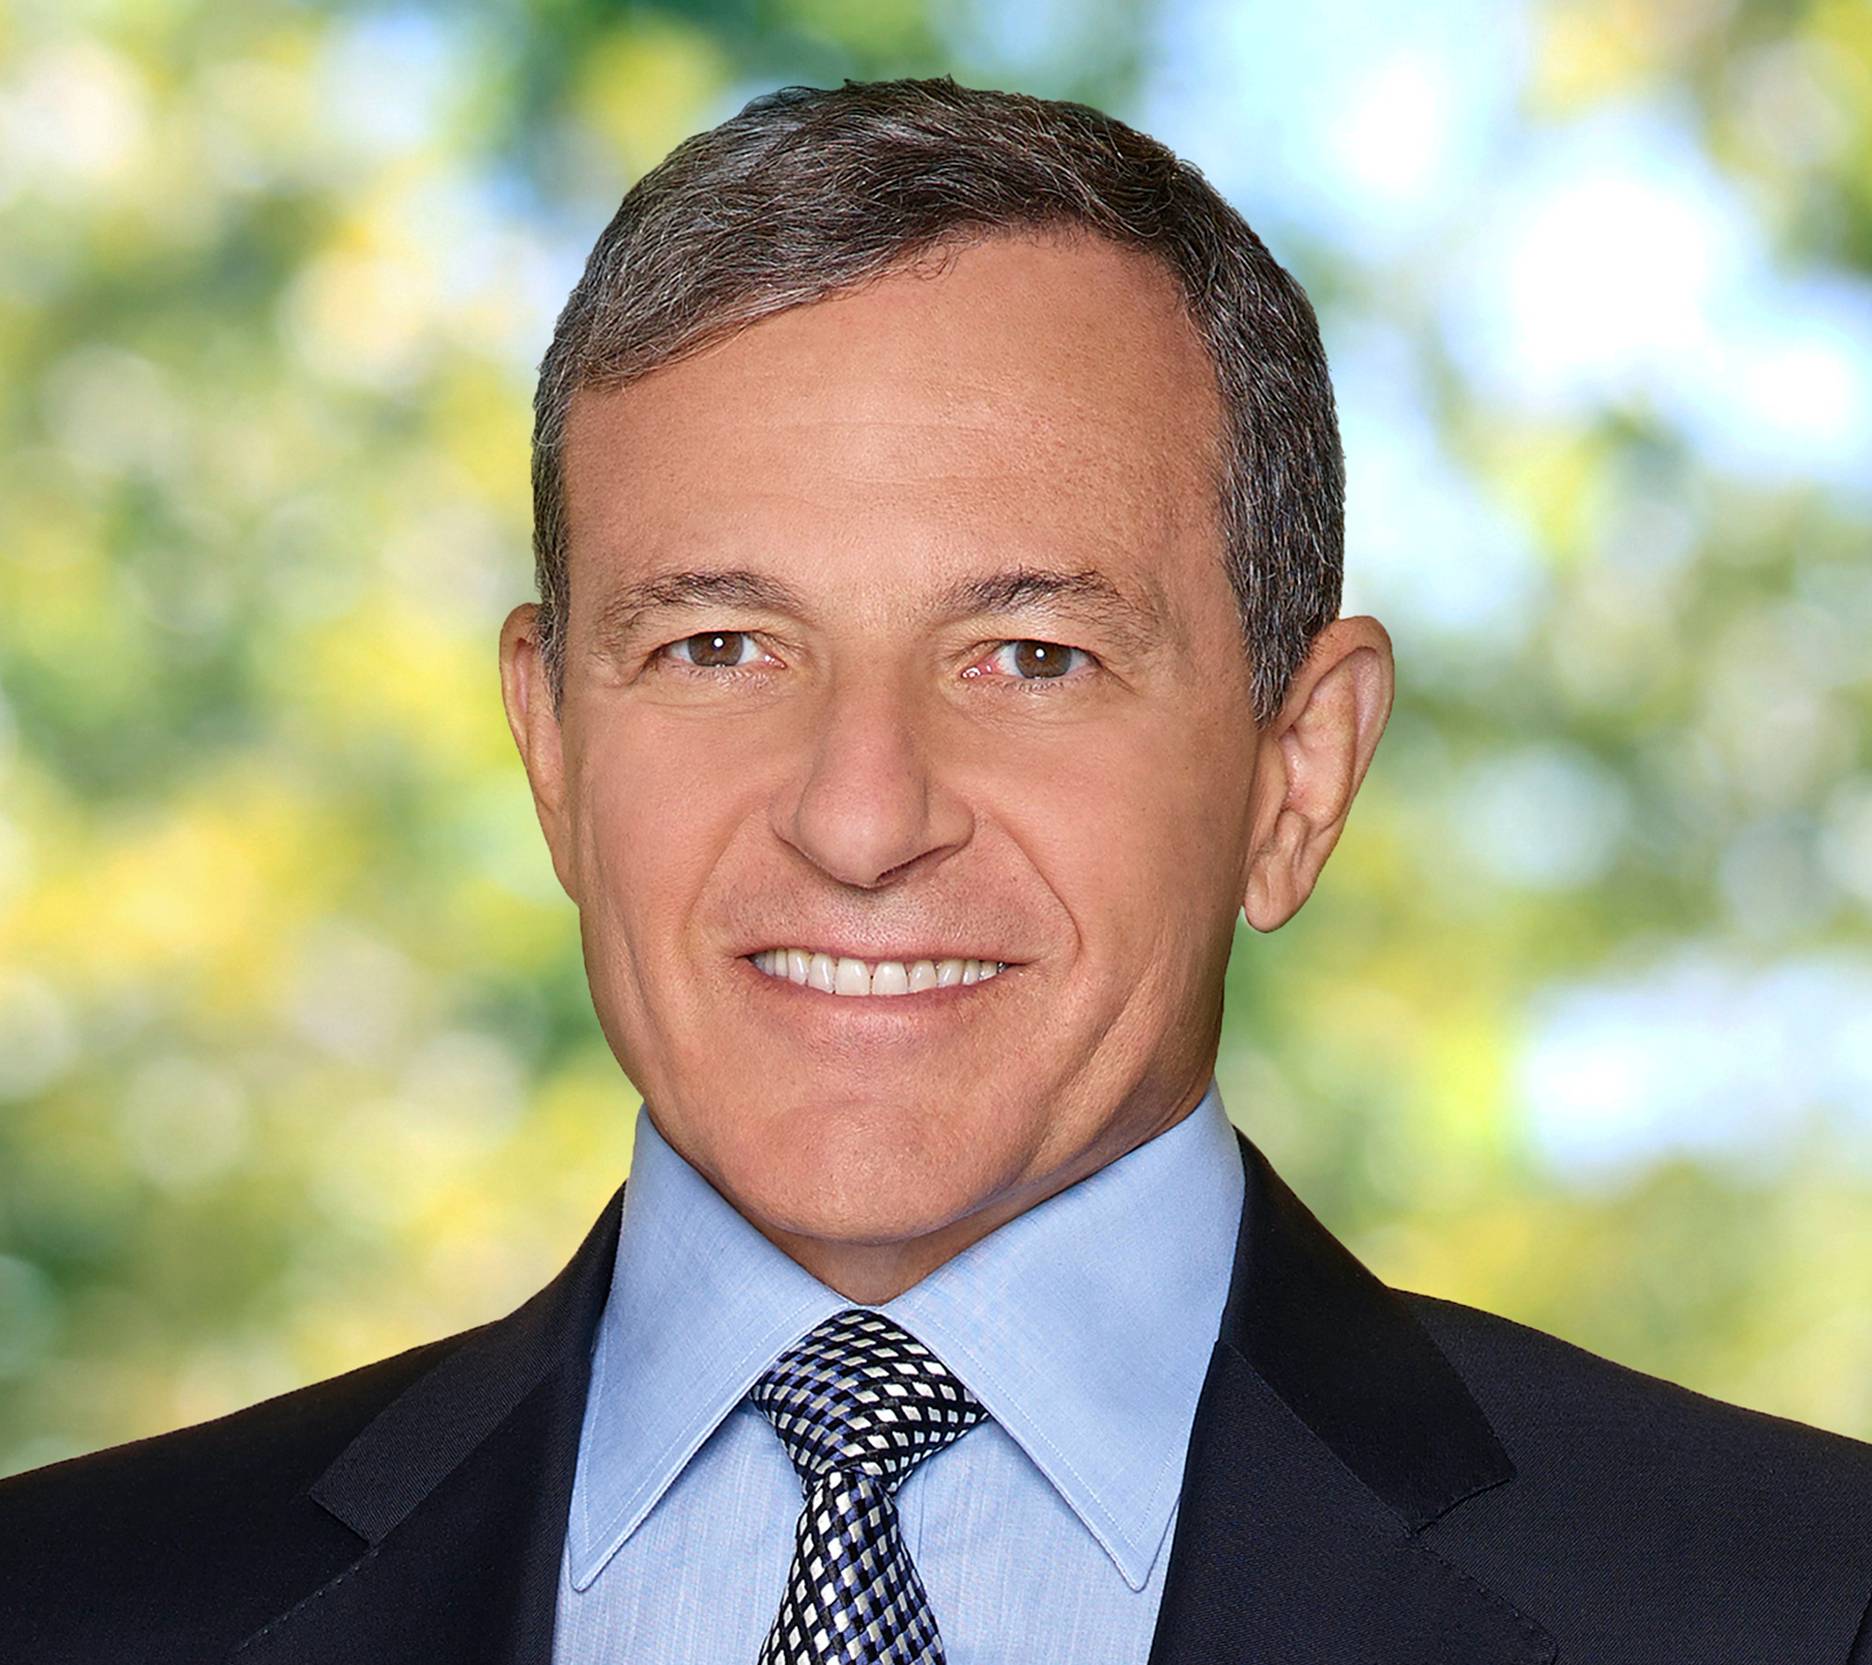 Disney CEO Bob Iger will host a 'Town Hall' to discuss 'future building opportunities'